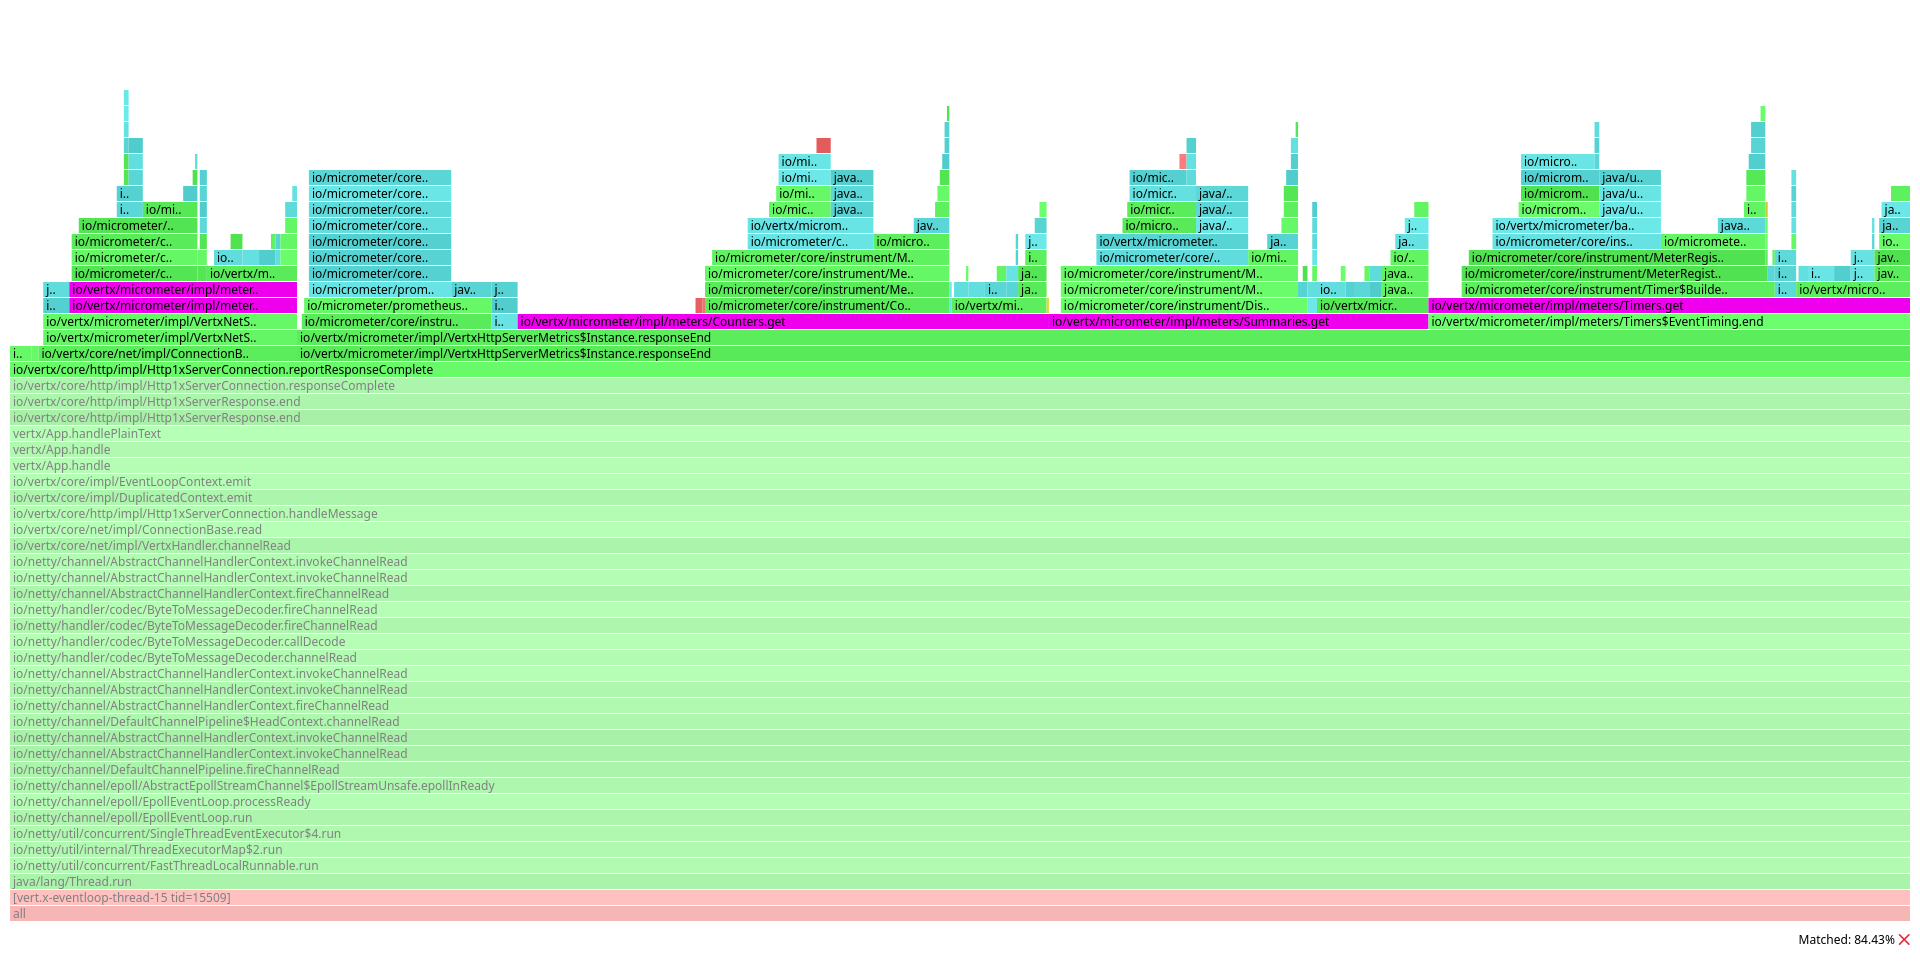 Flamegraph of the plaintext benchmark, focusing on reportResponseComplete